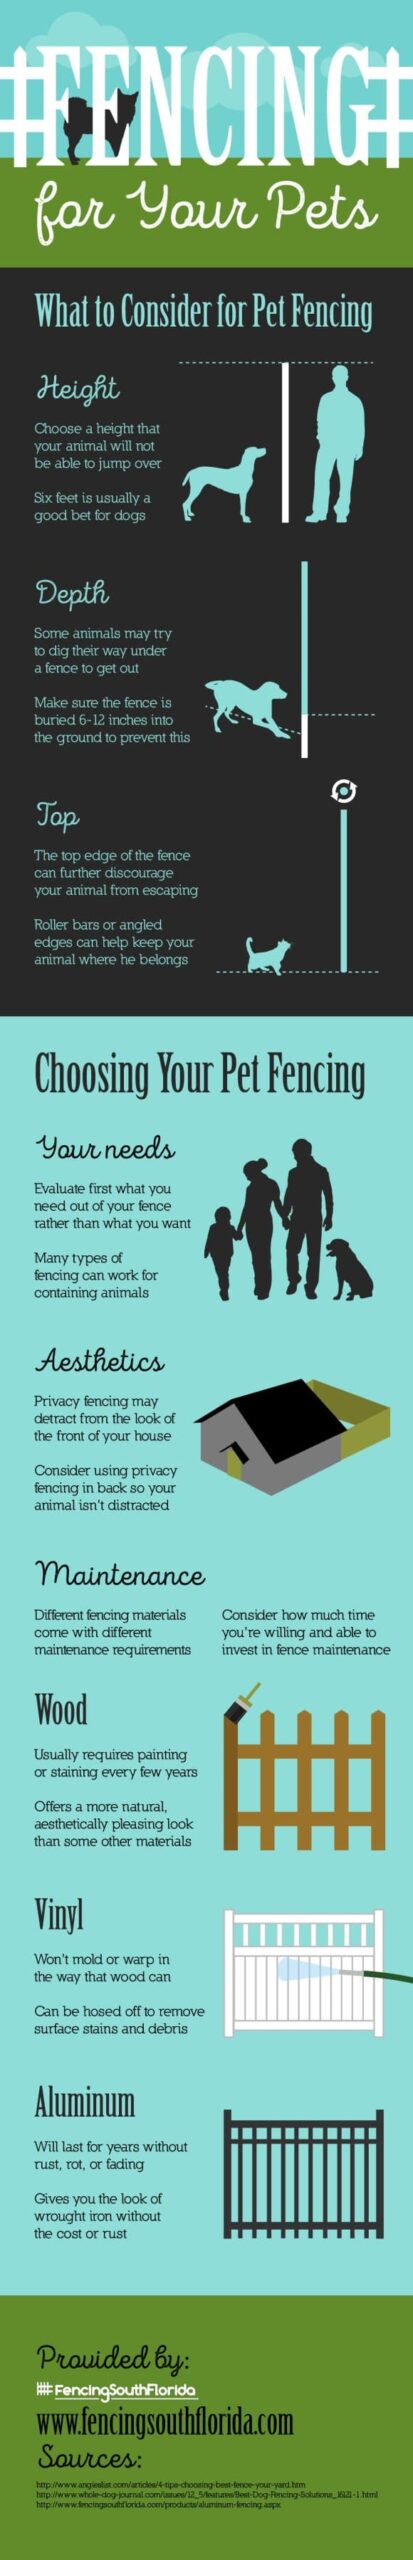 Infographics -Fencing for Your Pets